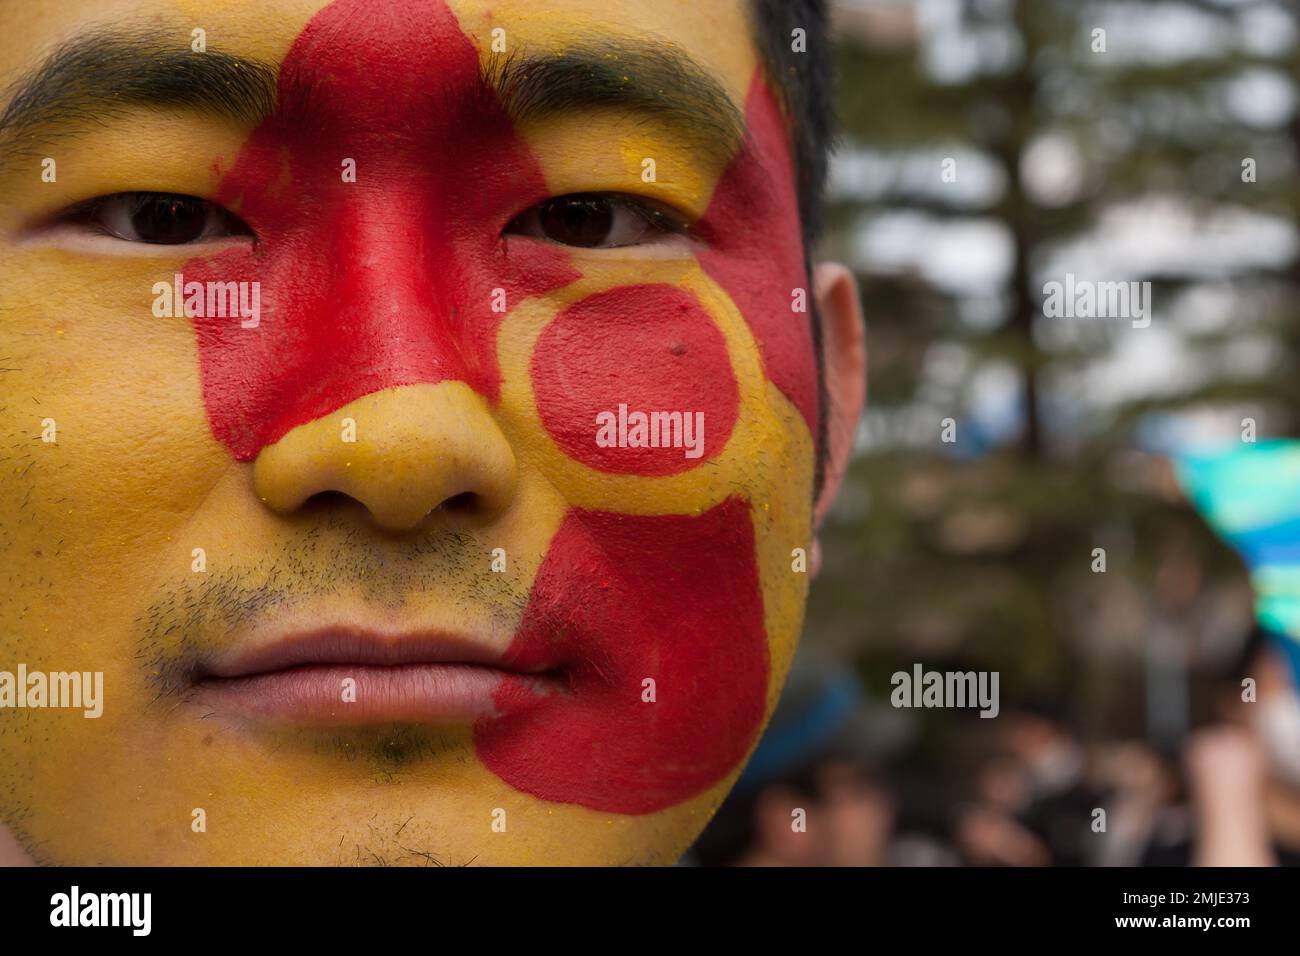 A Japanese man with a radioactive symbol painted on his face a an anti-nuclear power protest in Koenji, Tokyo, Japan. Stock Photo